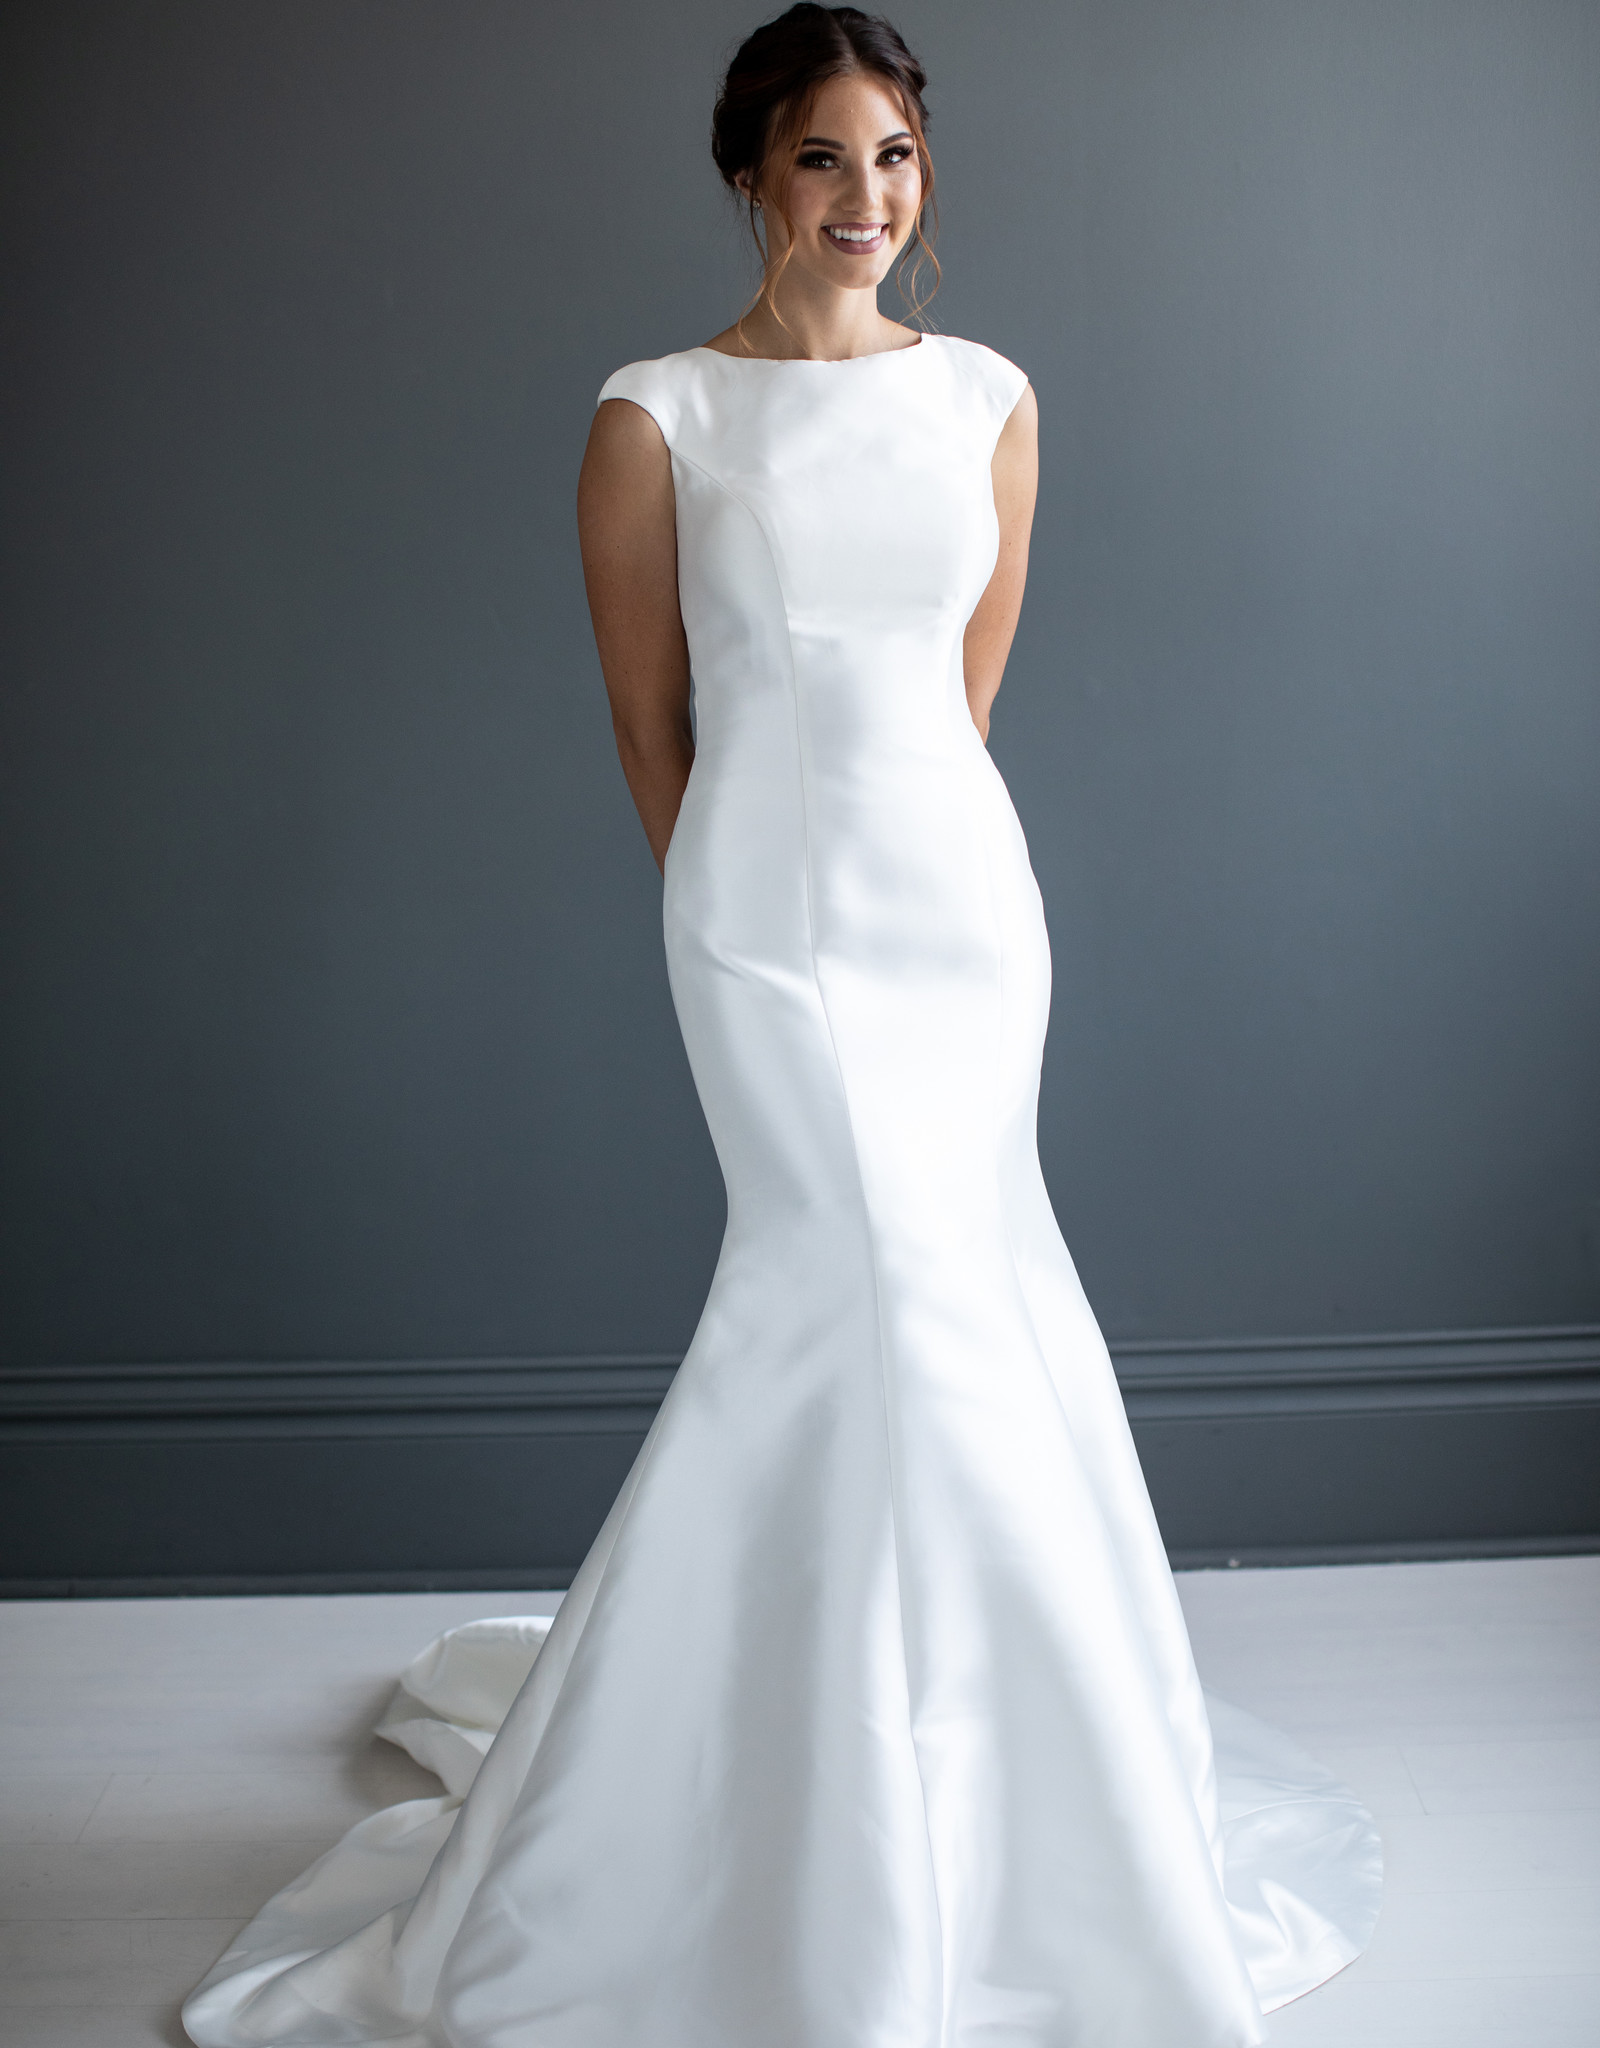 The Modest Bridal Collection Sydney